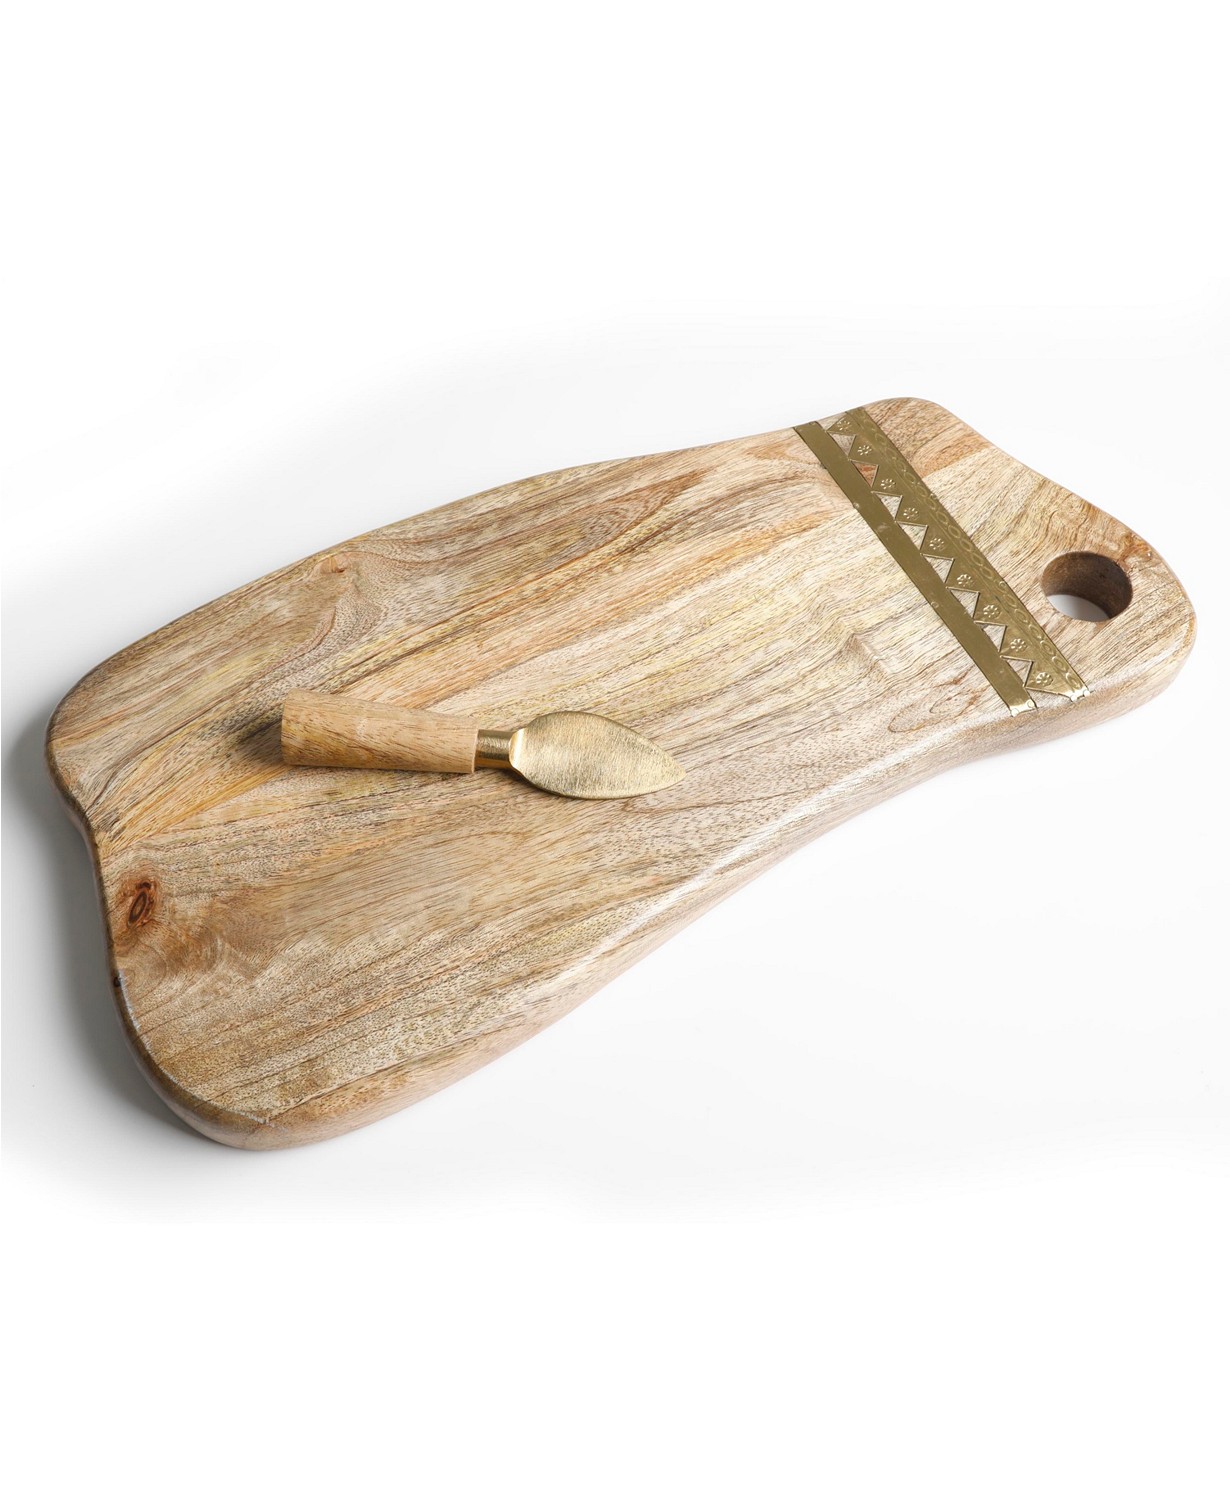 Wood Serving Board with Metal Trim and Cheese Knife